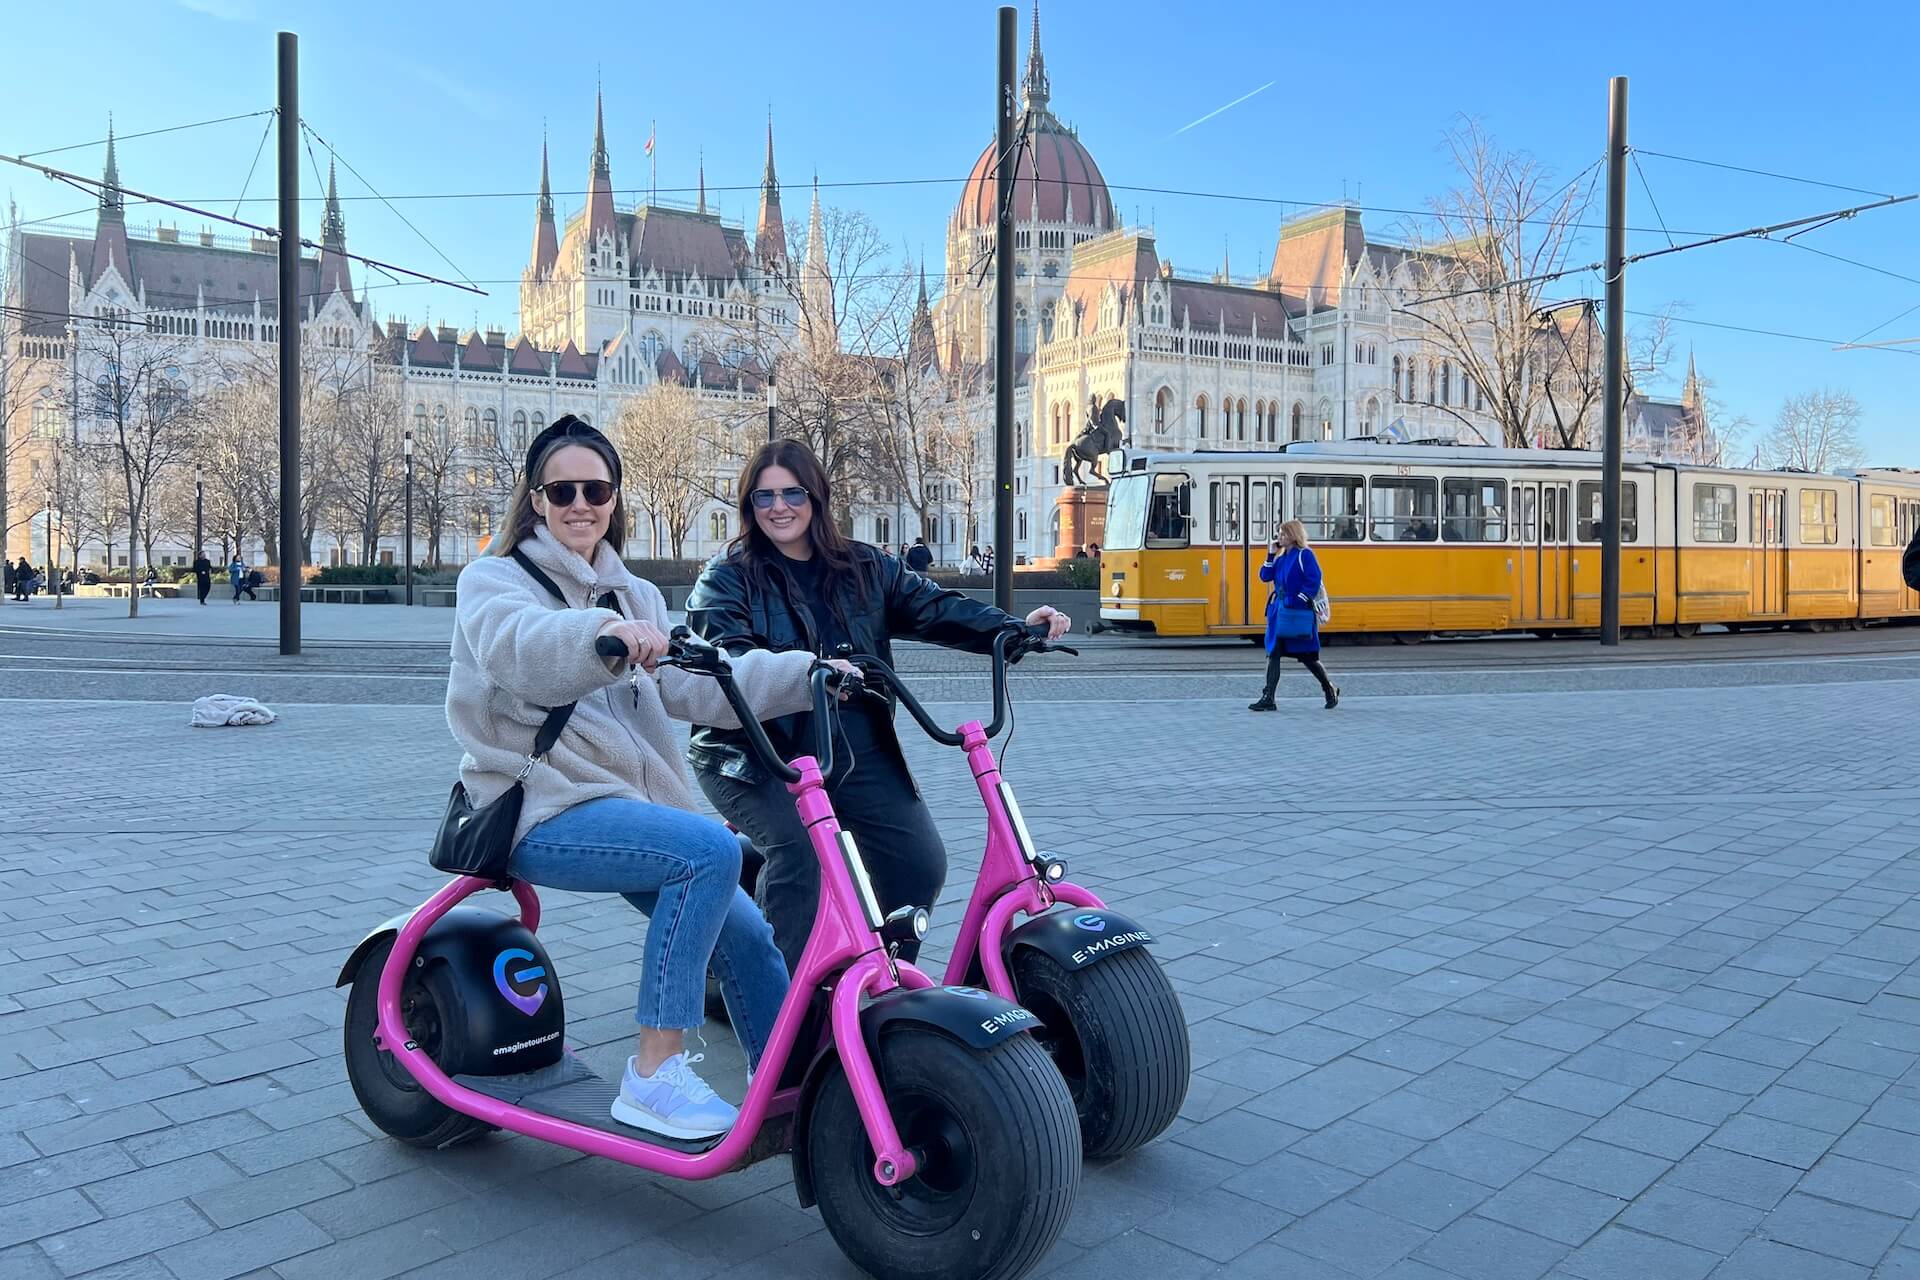 monsteroller escooters in front of the Budapest parliament building